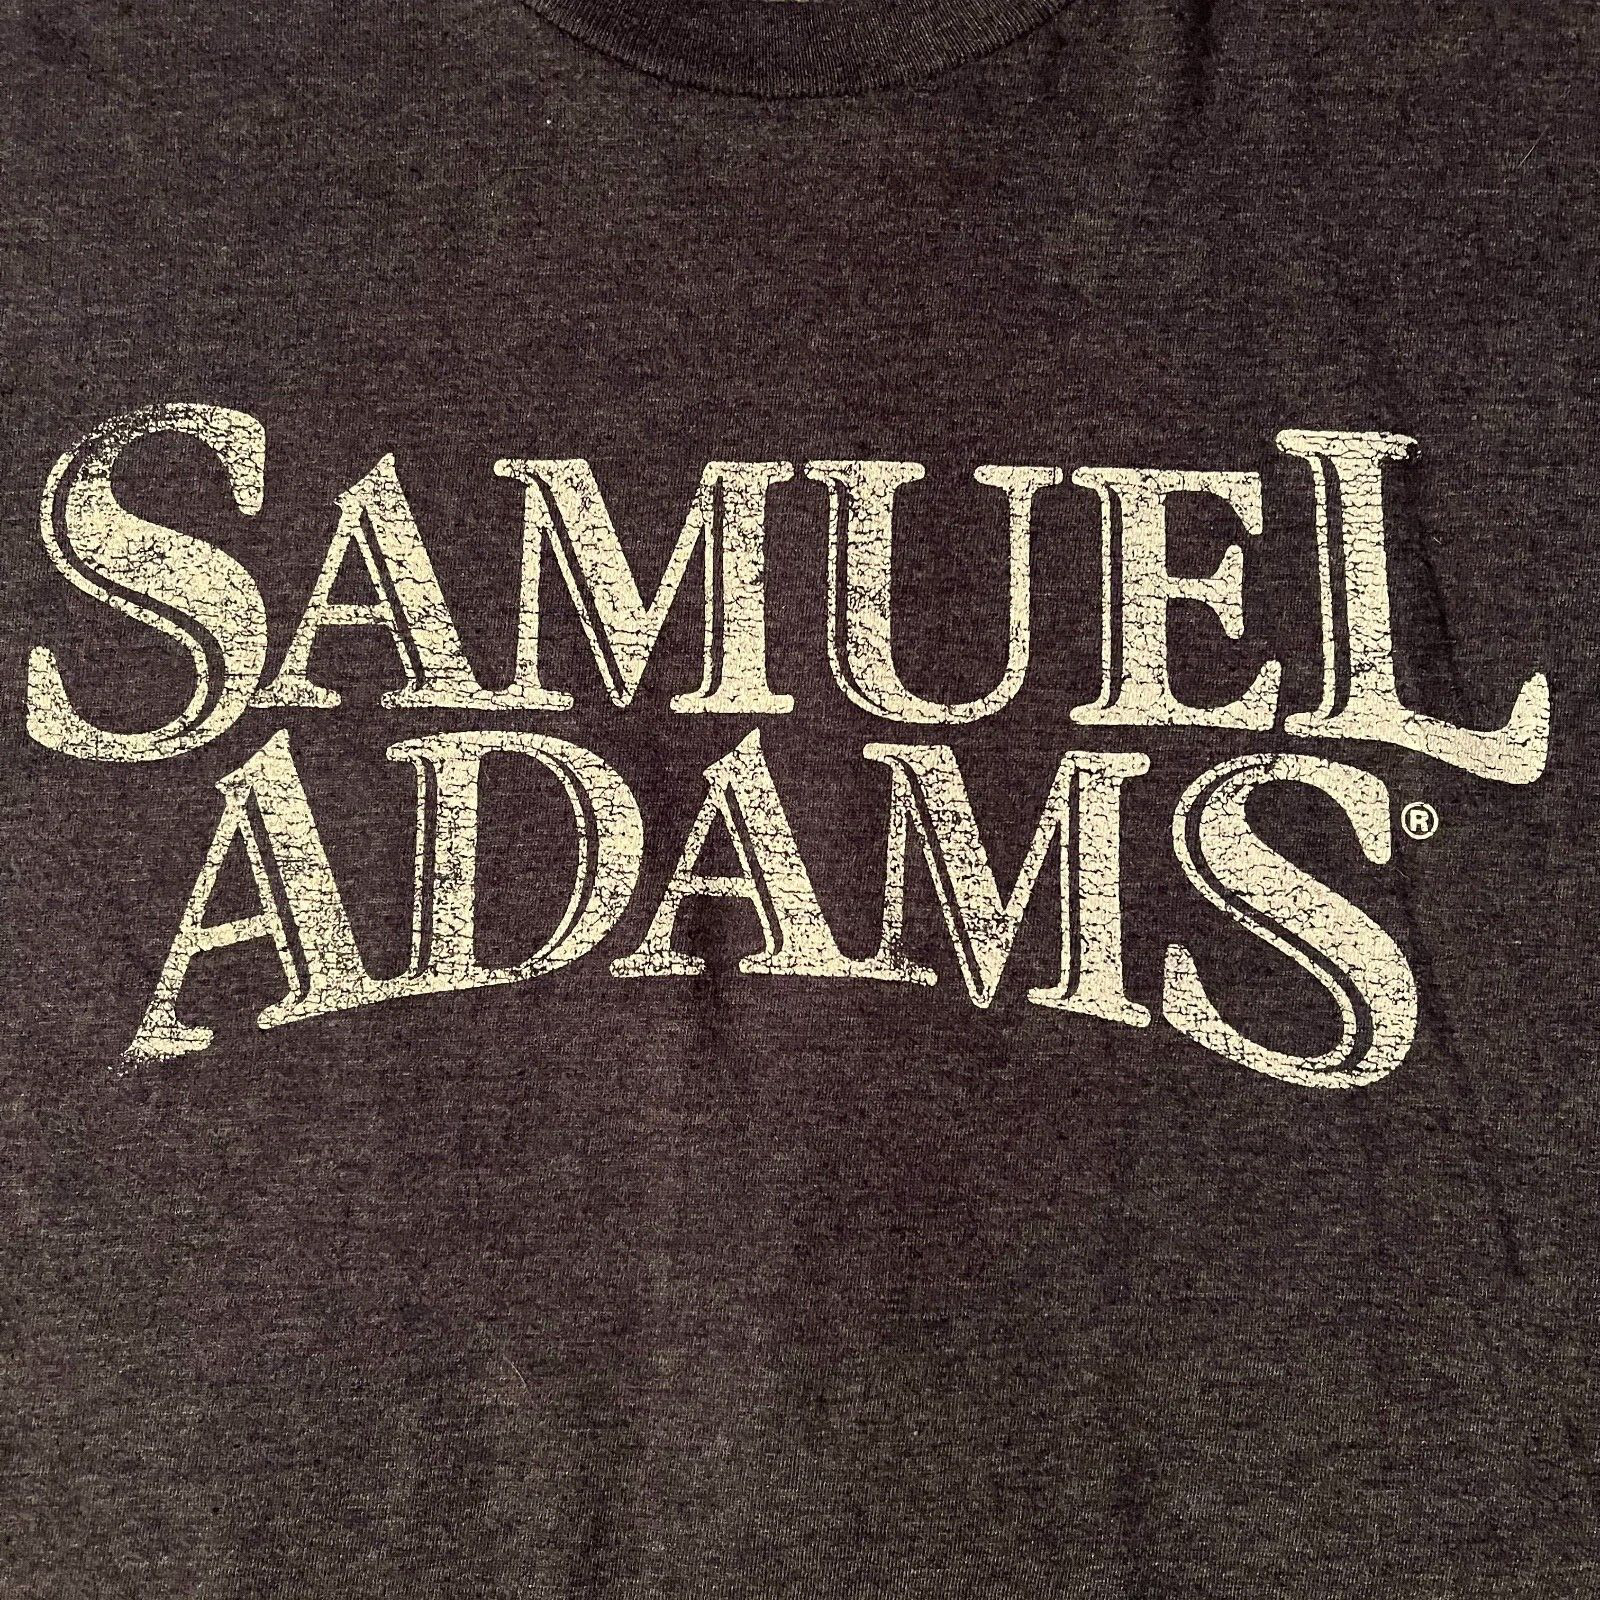 official SAMUEL ADAMS t-shirt - FOR THE LOVE OF BEER - lager IPA  - (XL)